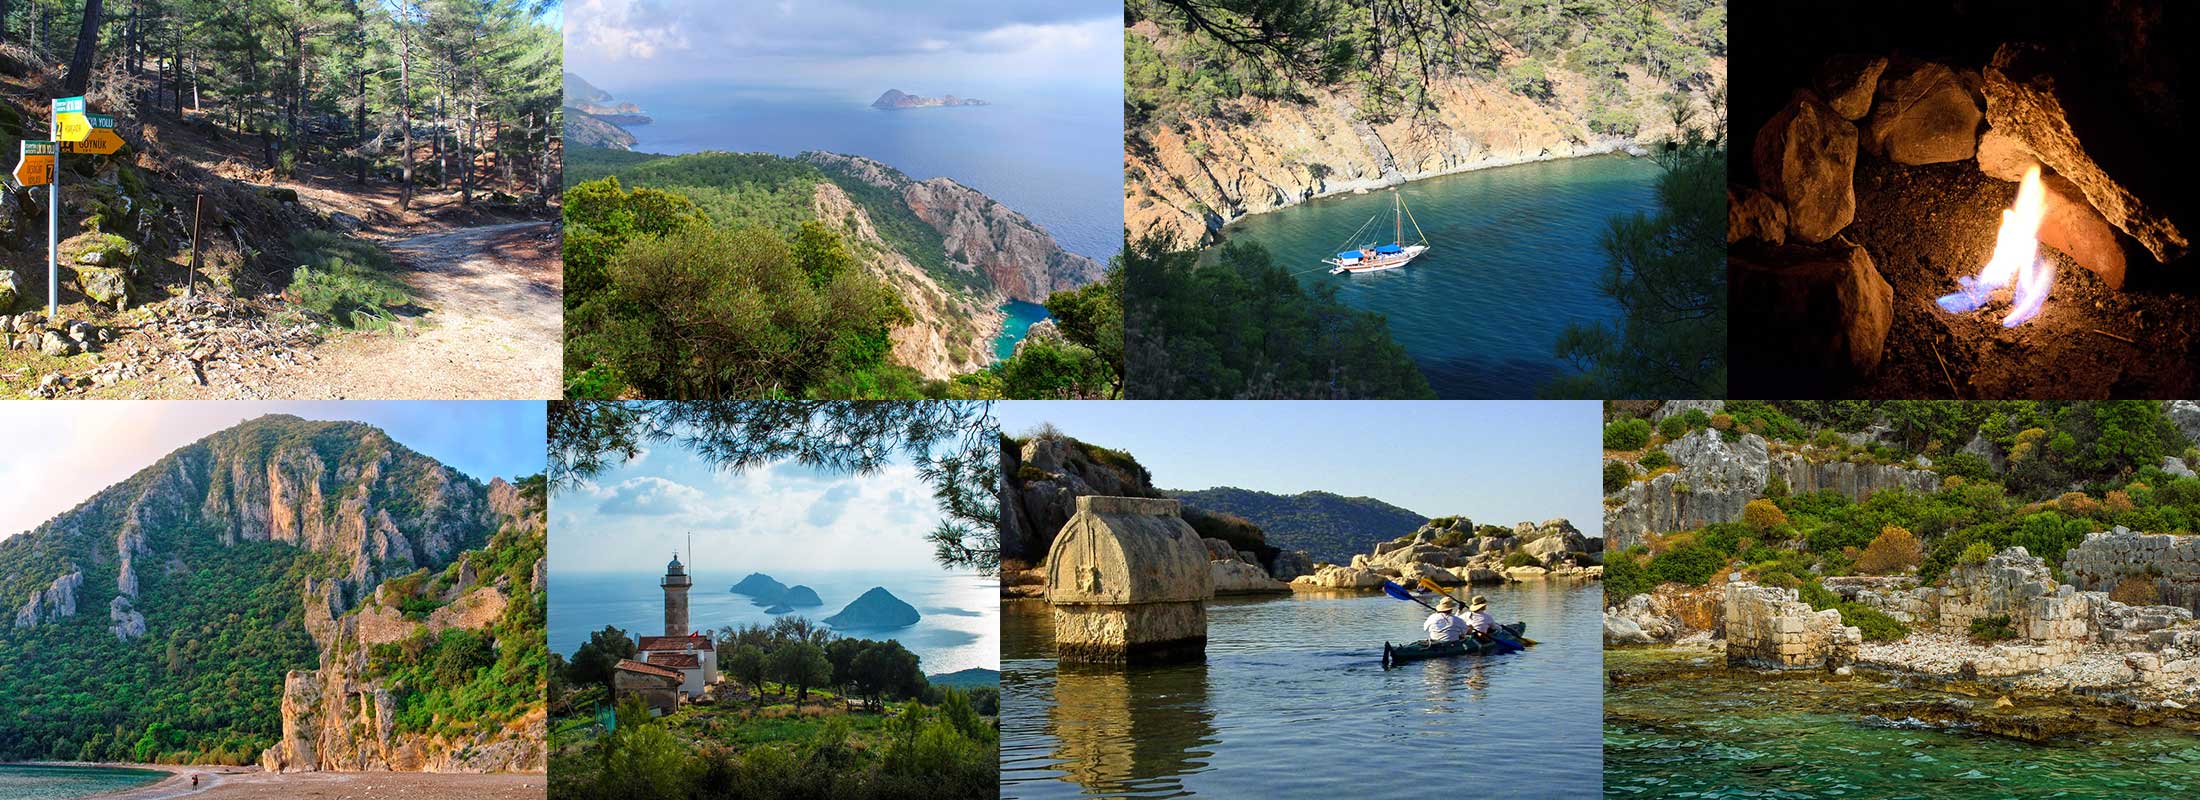 15-days-TREKKING-AND-EXPEDITION-ON-THE-LYCIAN-WAY-turkey